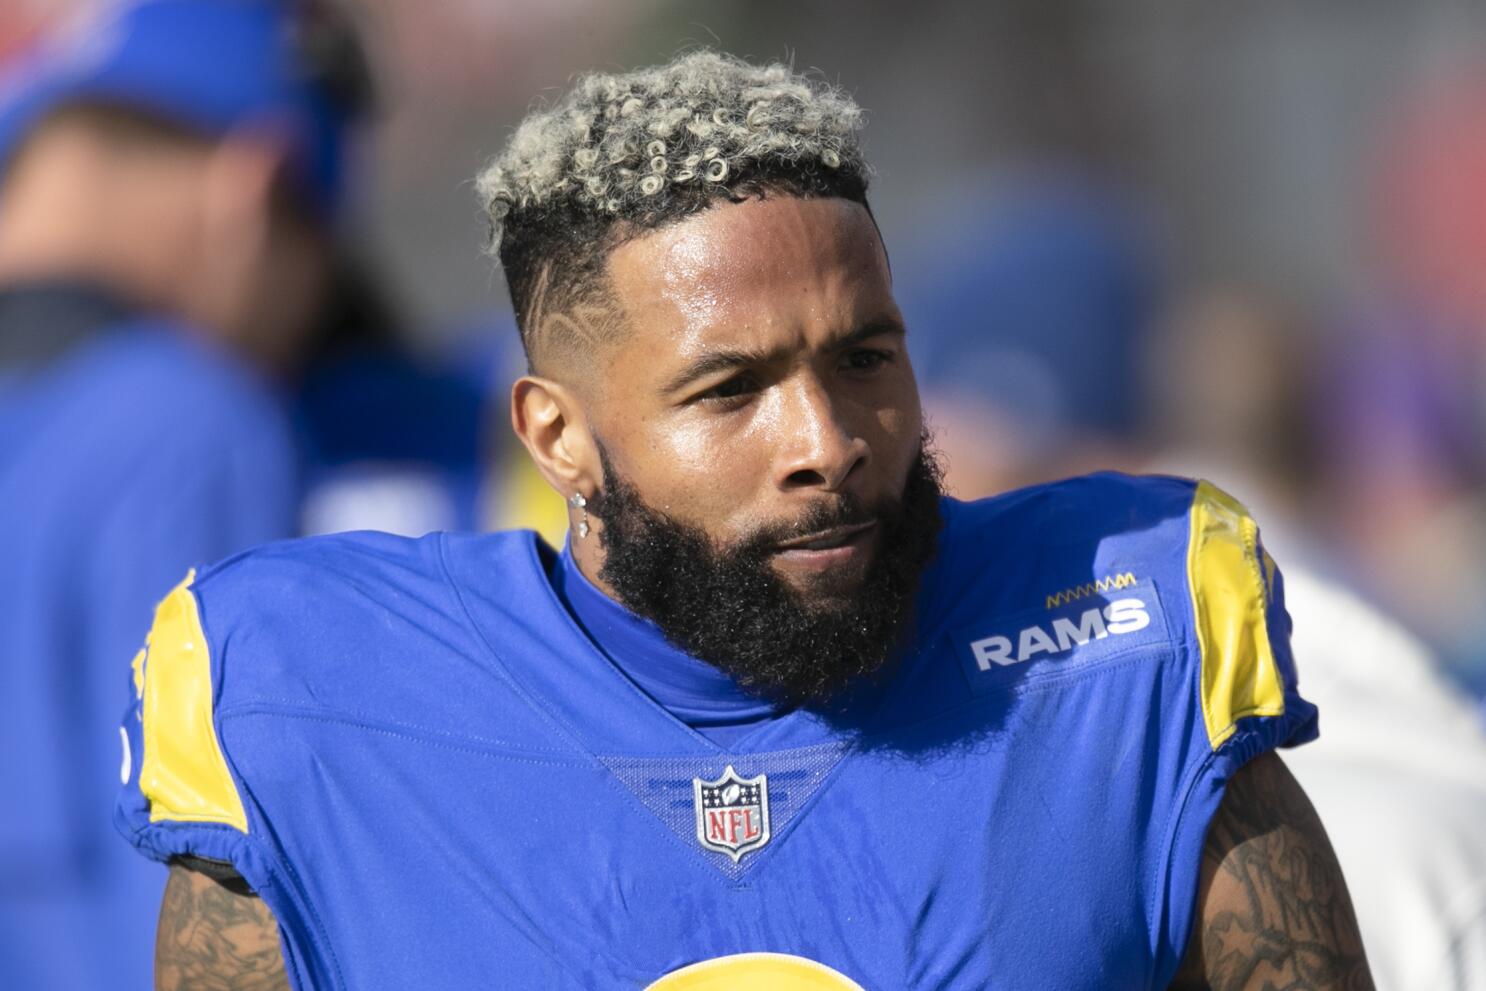 Former Rams star Odell Beckham Jr. removed from plane in Miami